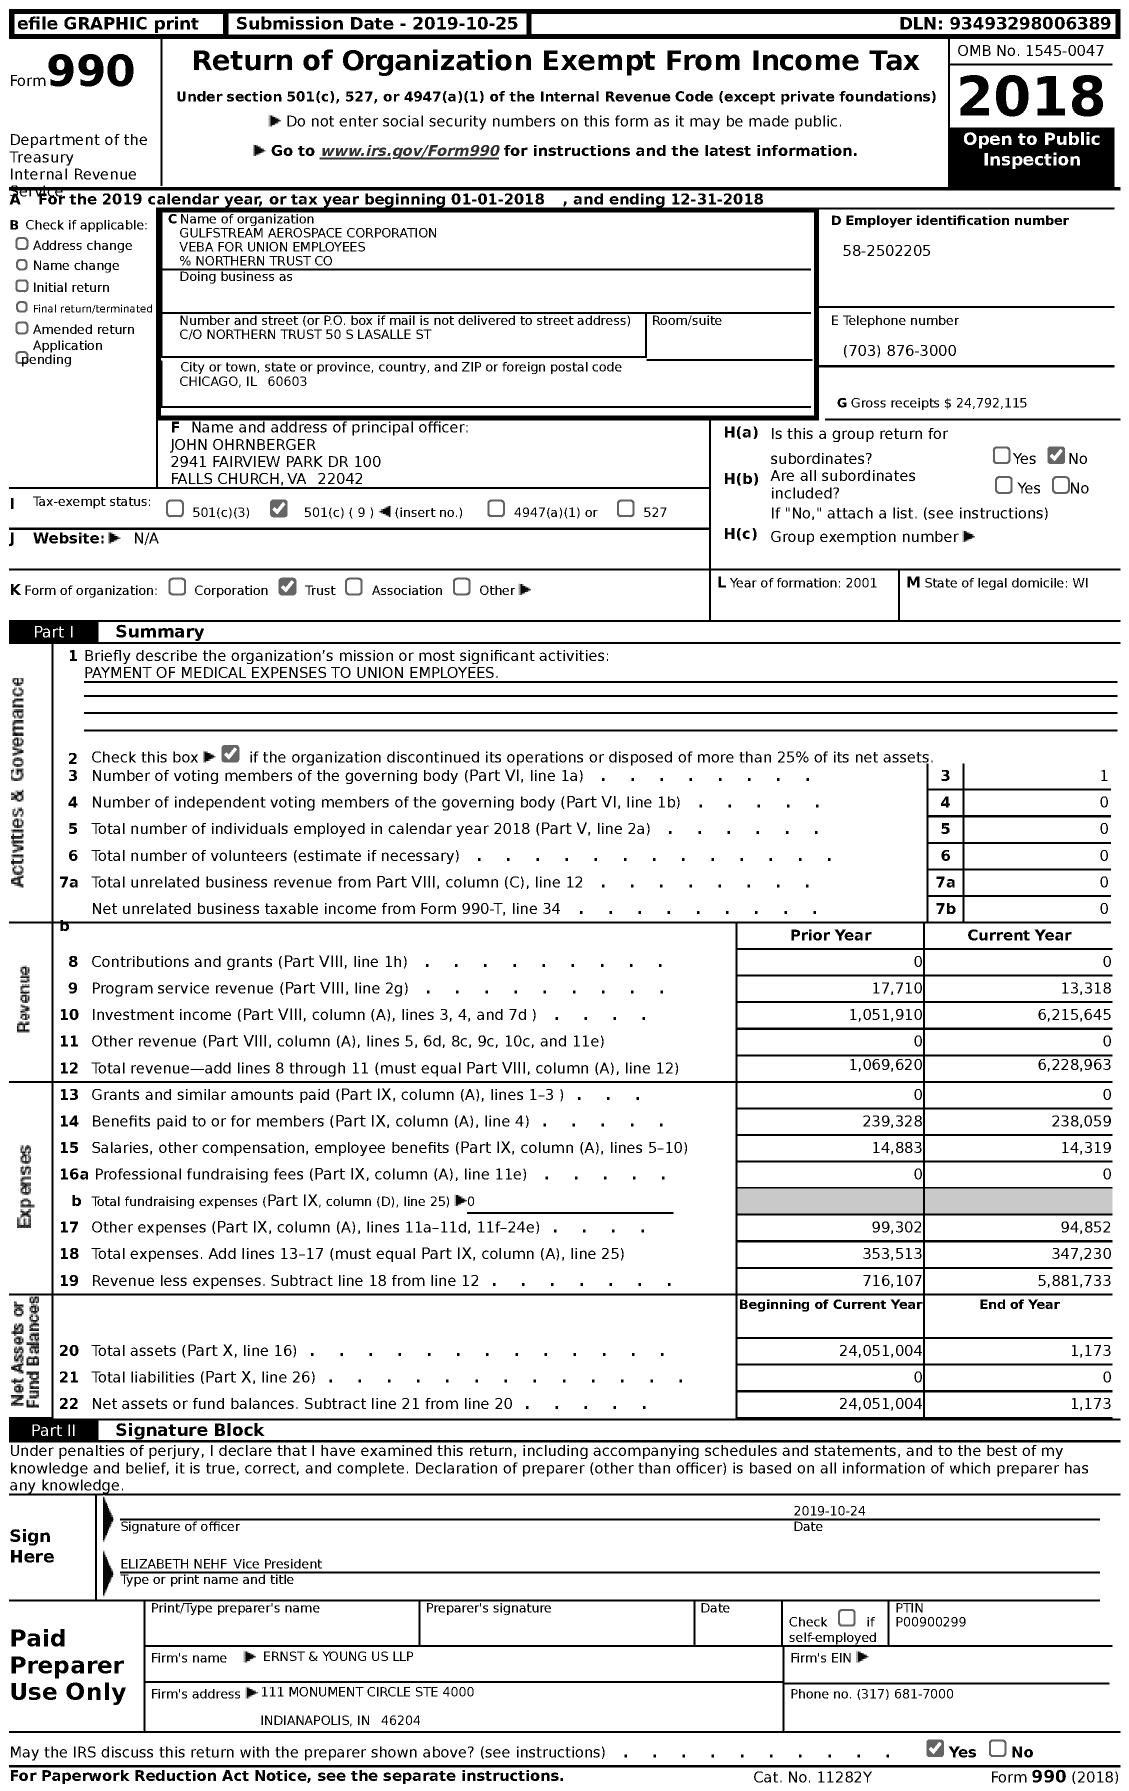 Image of first page of 2018 Form 990 for Gulfstream Aerospace Corporation Veba for Union Employees